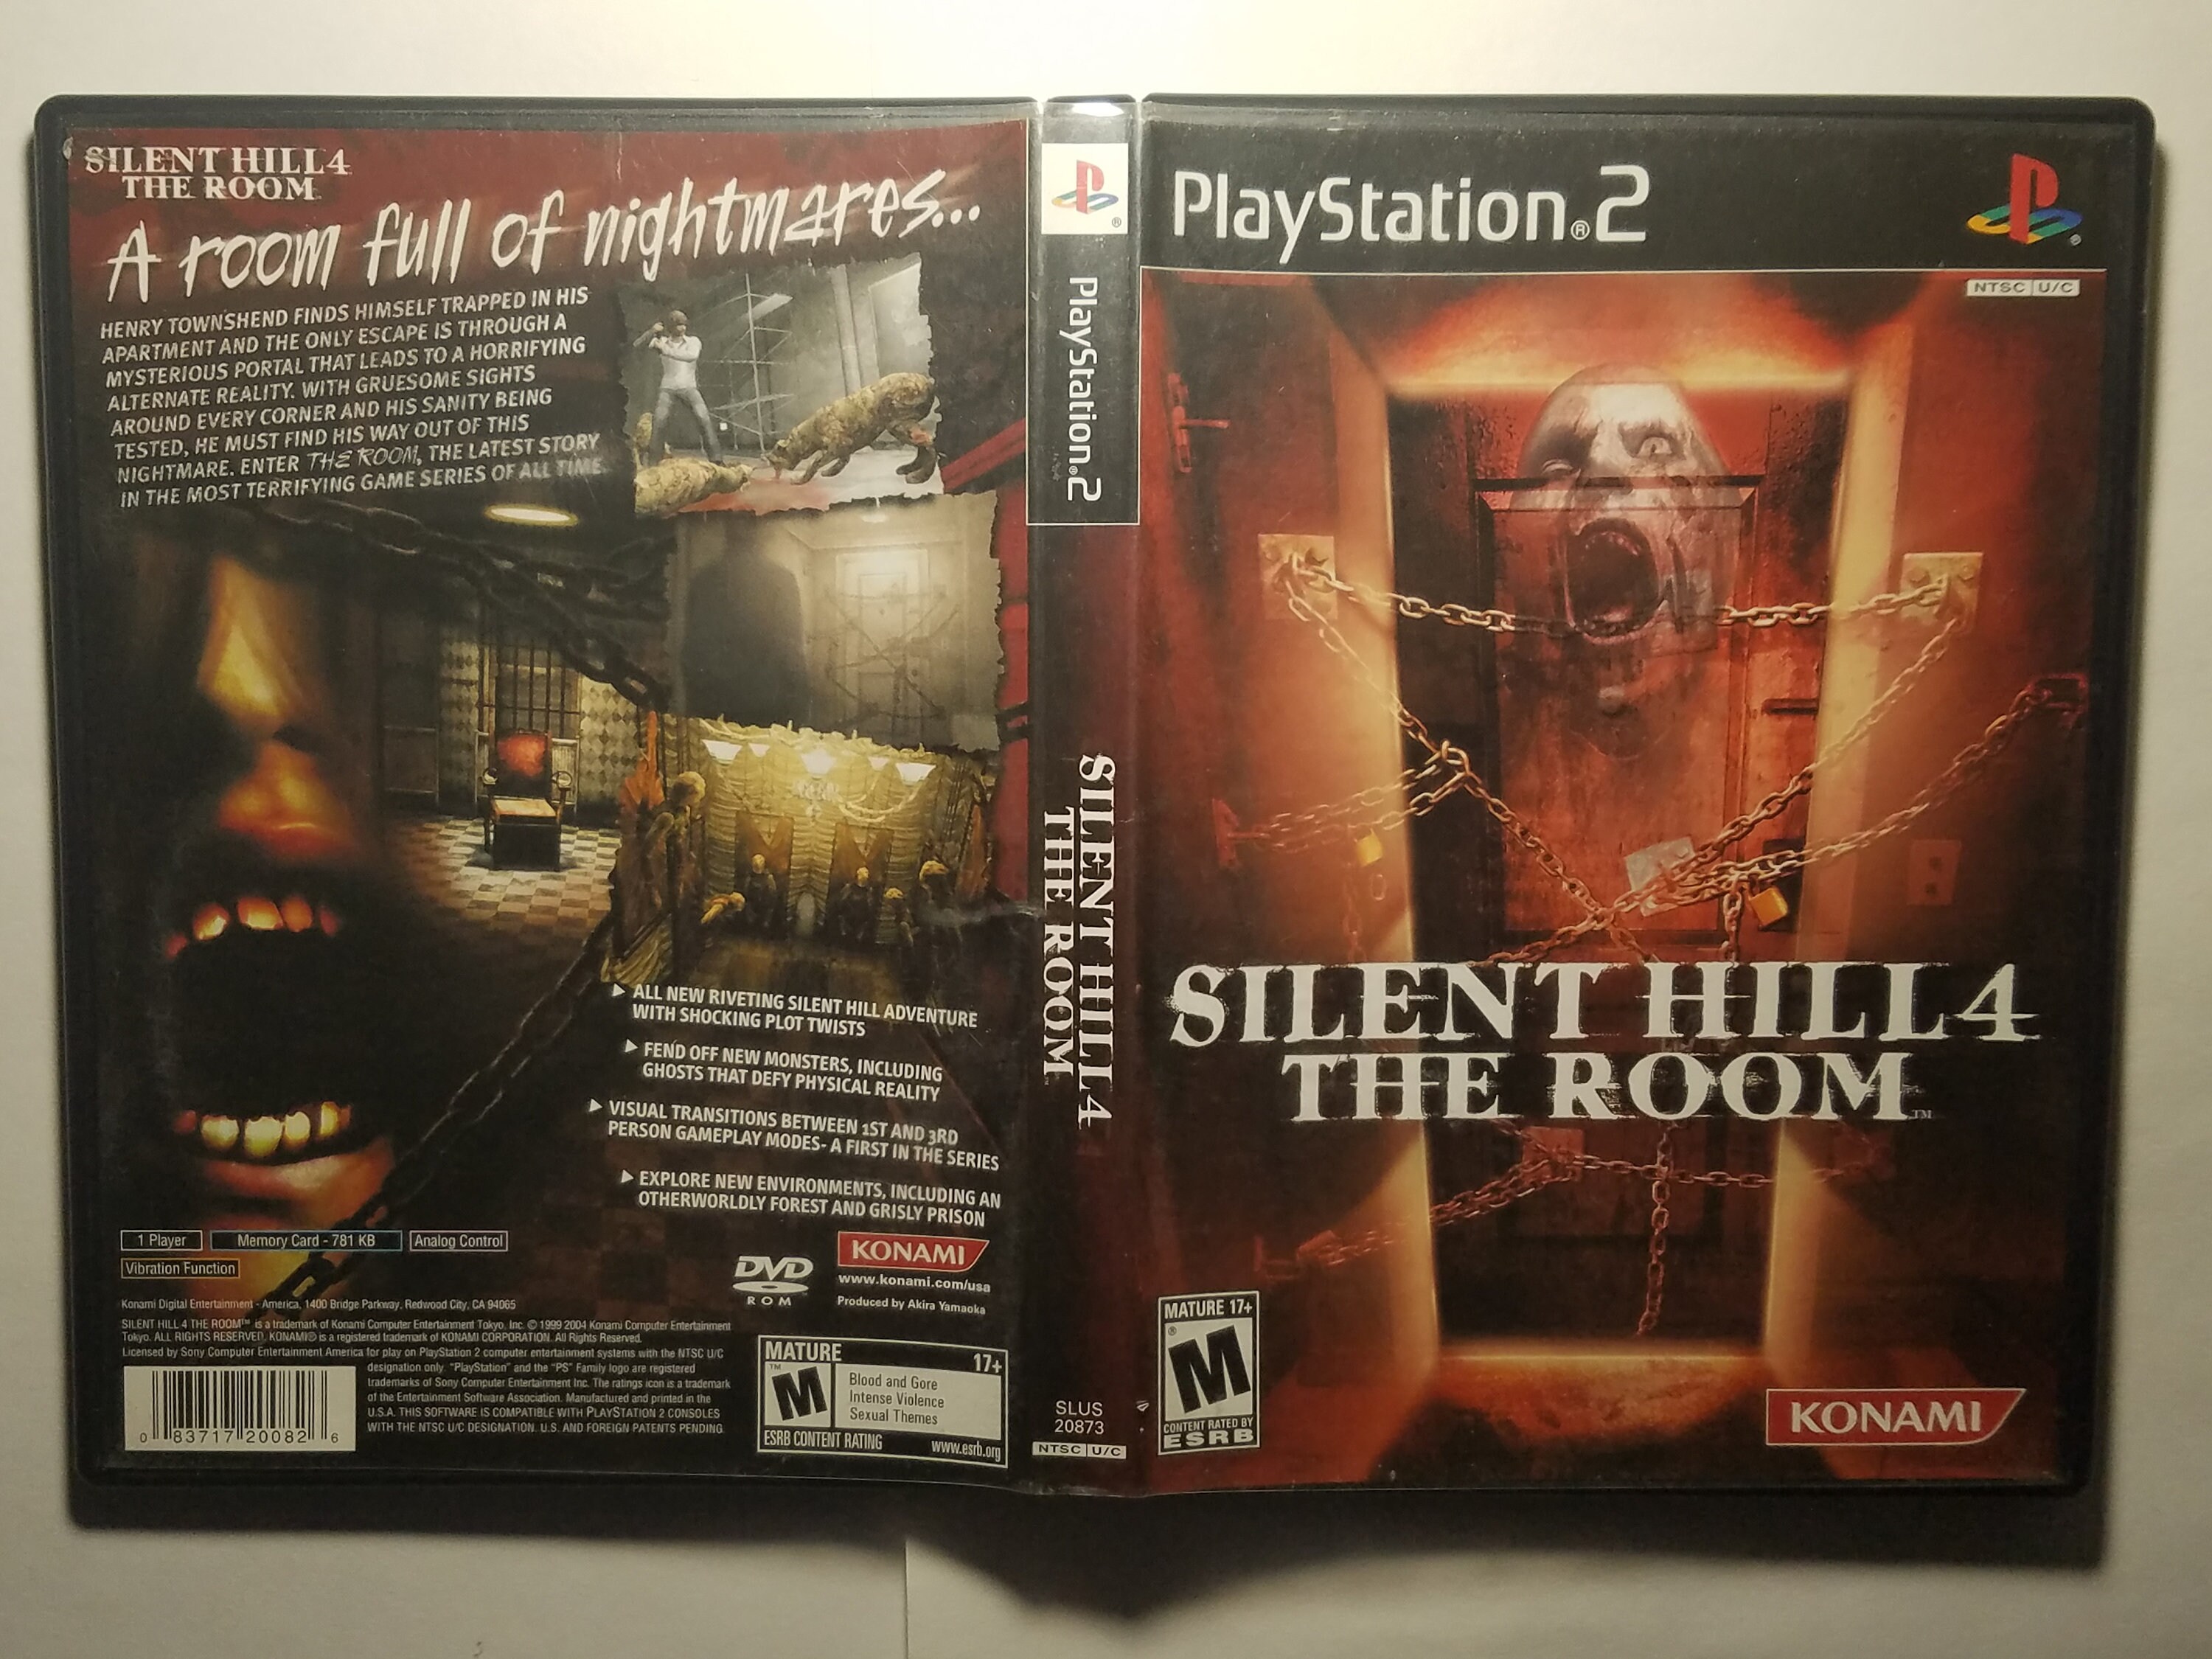 Dead by Daylight Silent Hill Edition Official Japanese Ver. (Multi  Language) [PS4]